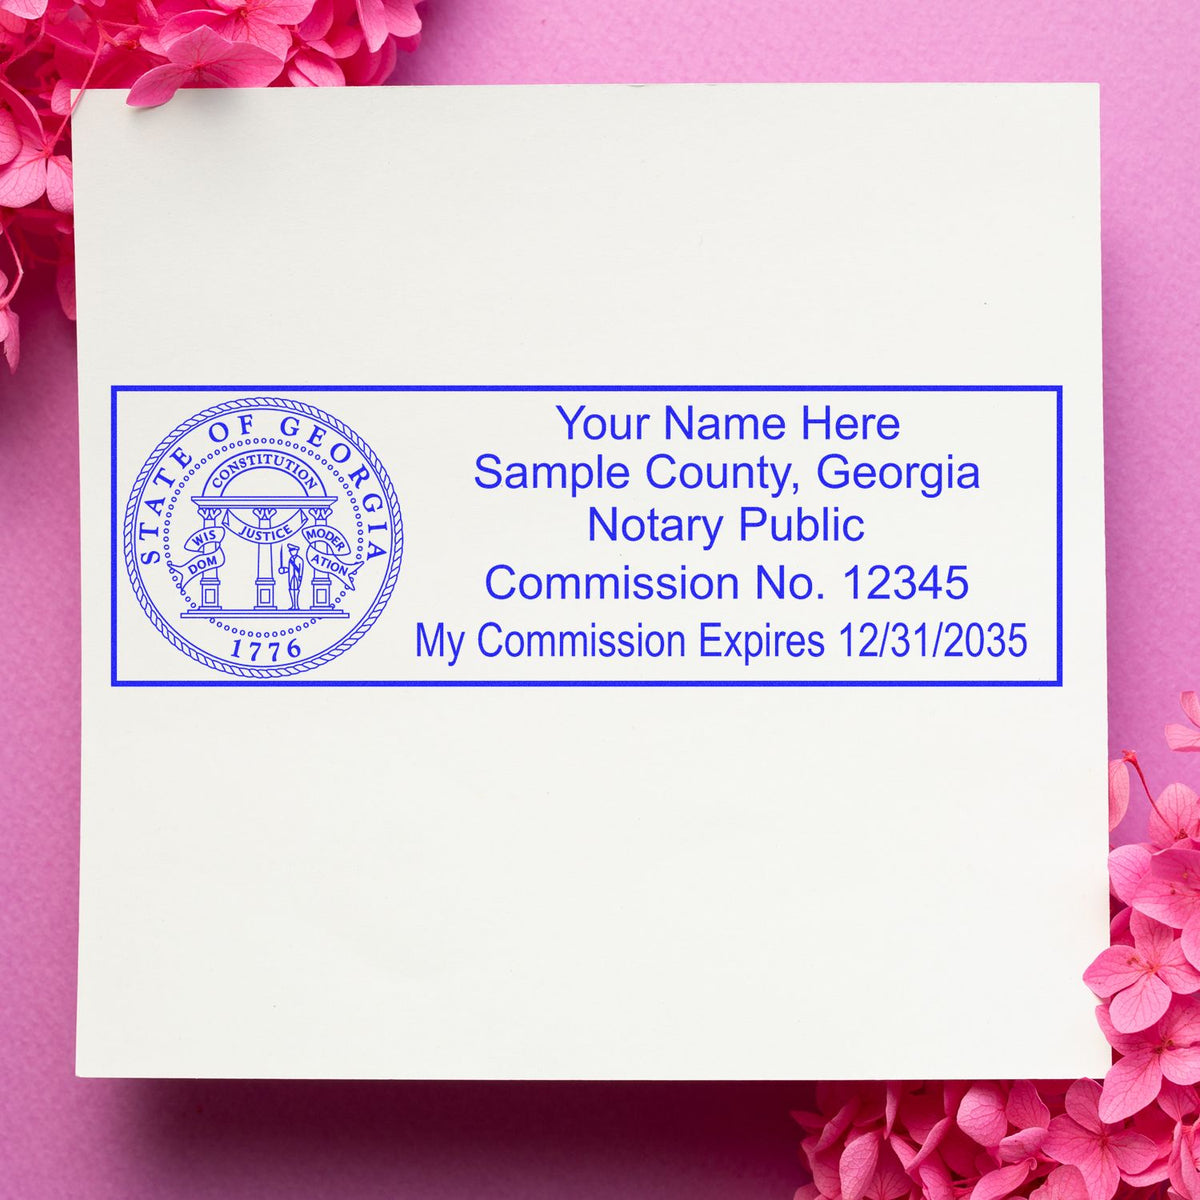 A lifestyle photo showing a stamped image of the Wooden Handle Georgia Rectangular Notary Public Stamp on a piece of paper